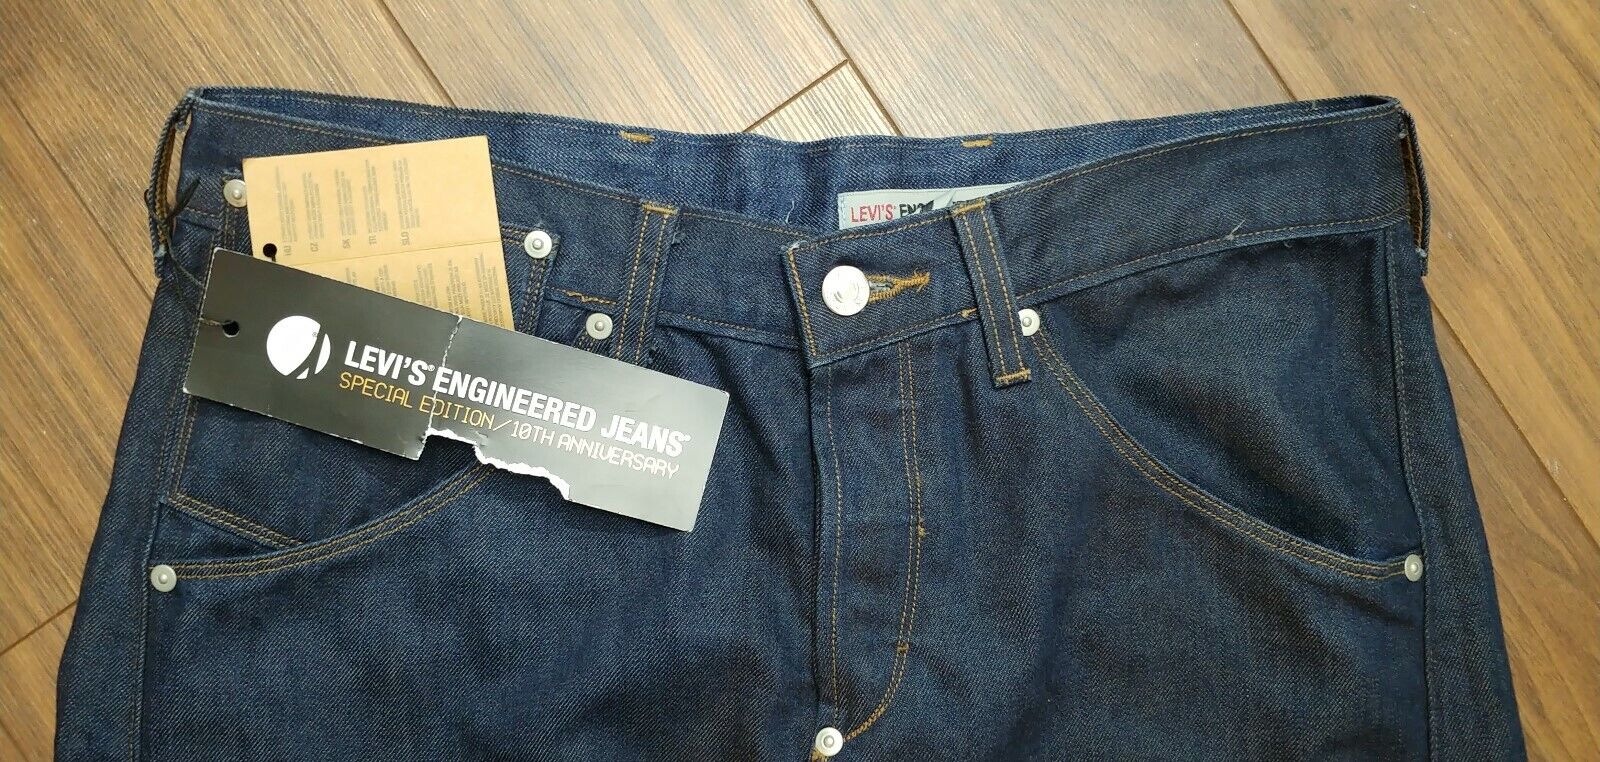 NWT LEVI'S JEANS TWISTED / ENGINEERED SIZE 32X34 10TH ANNIVERSARY 2006  irregular